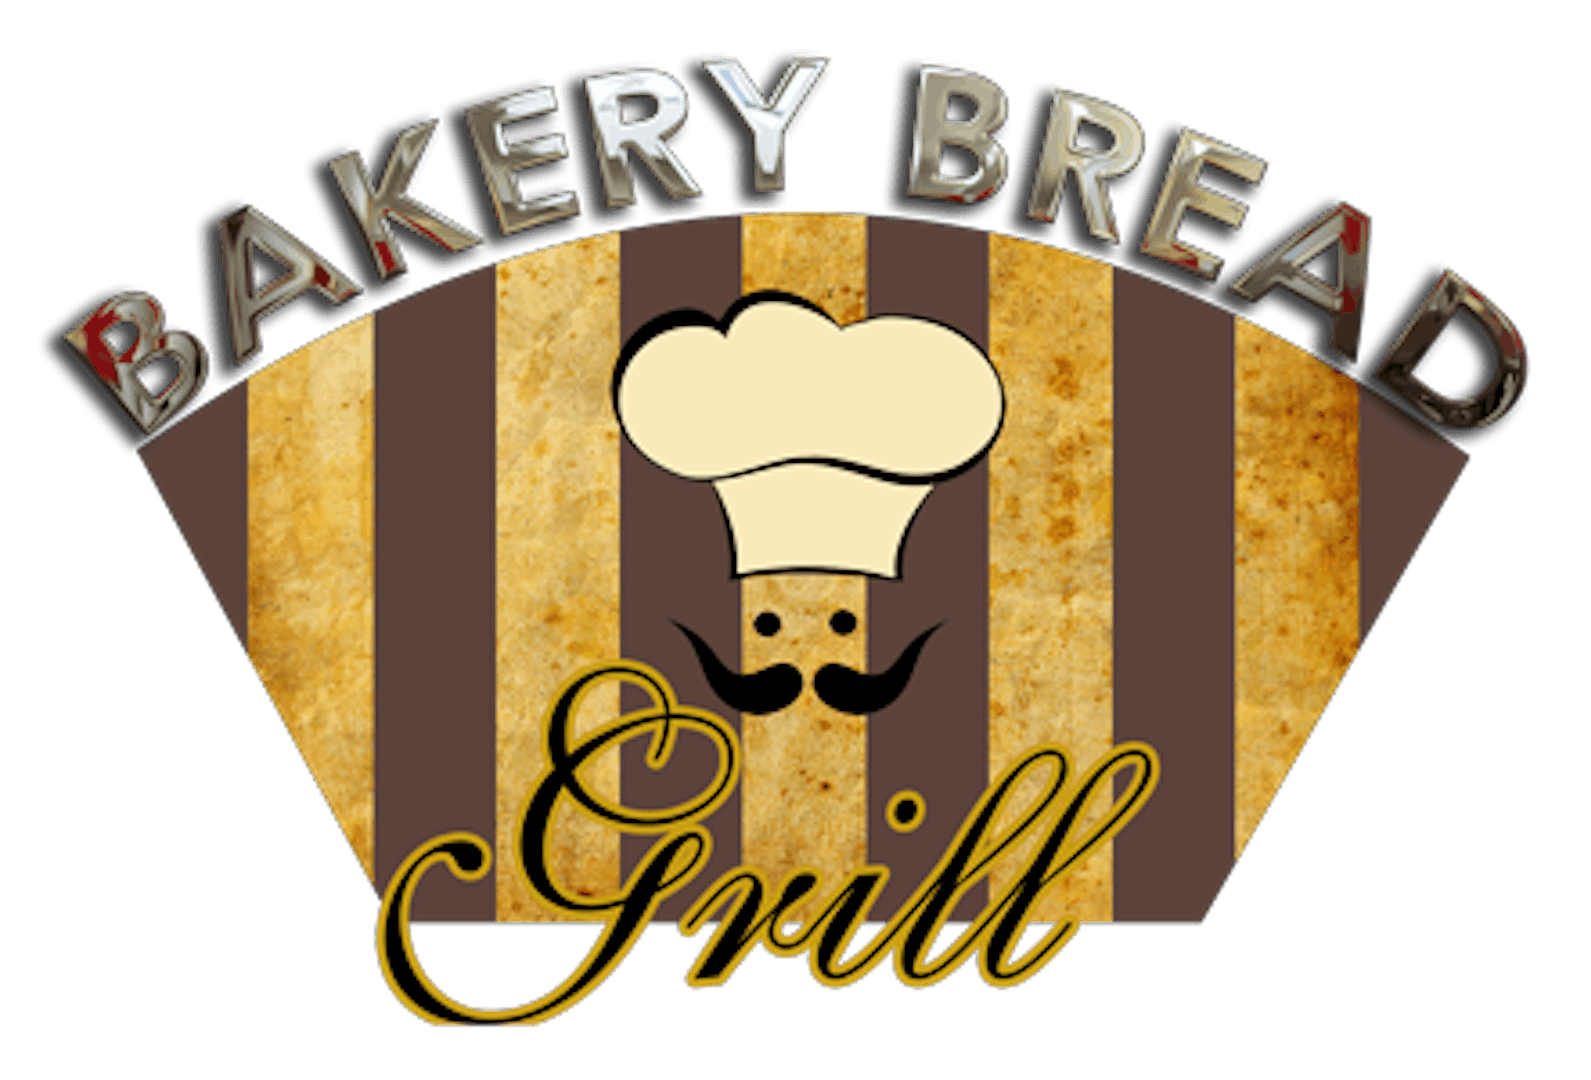 Bakery, Bread and Grill